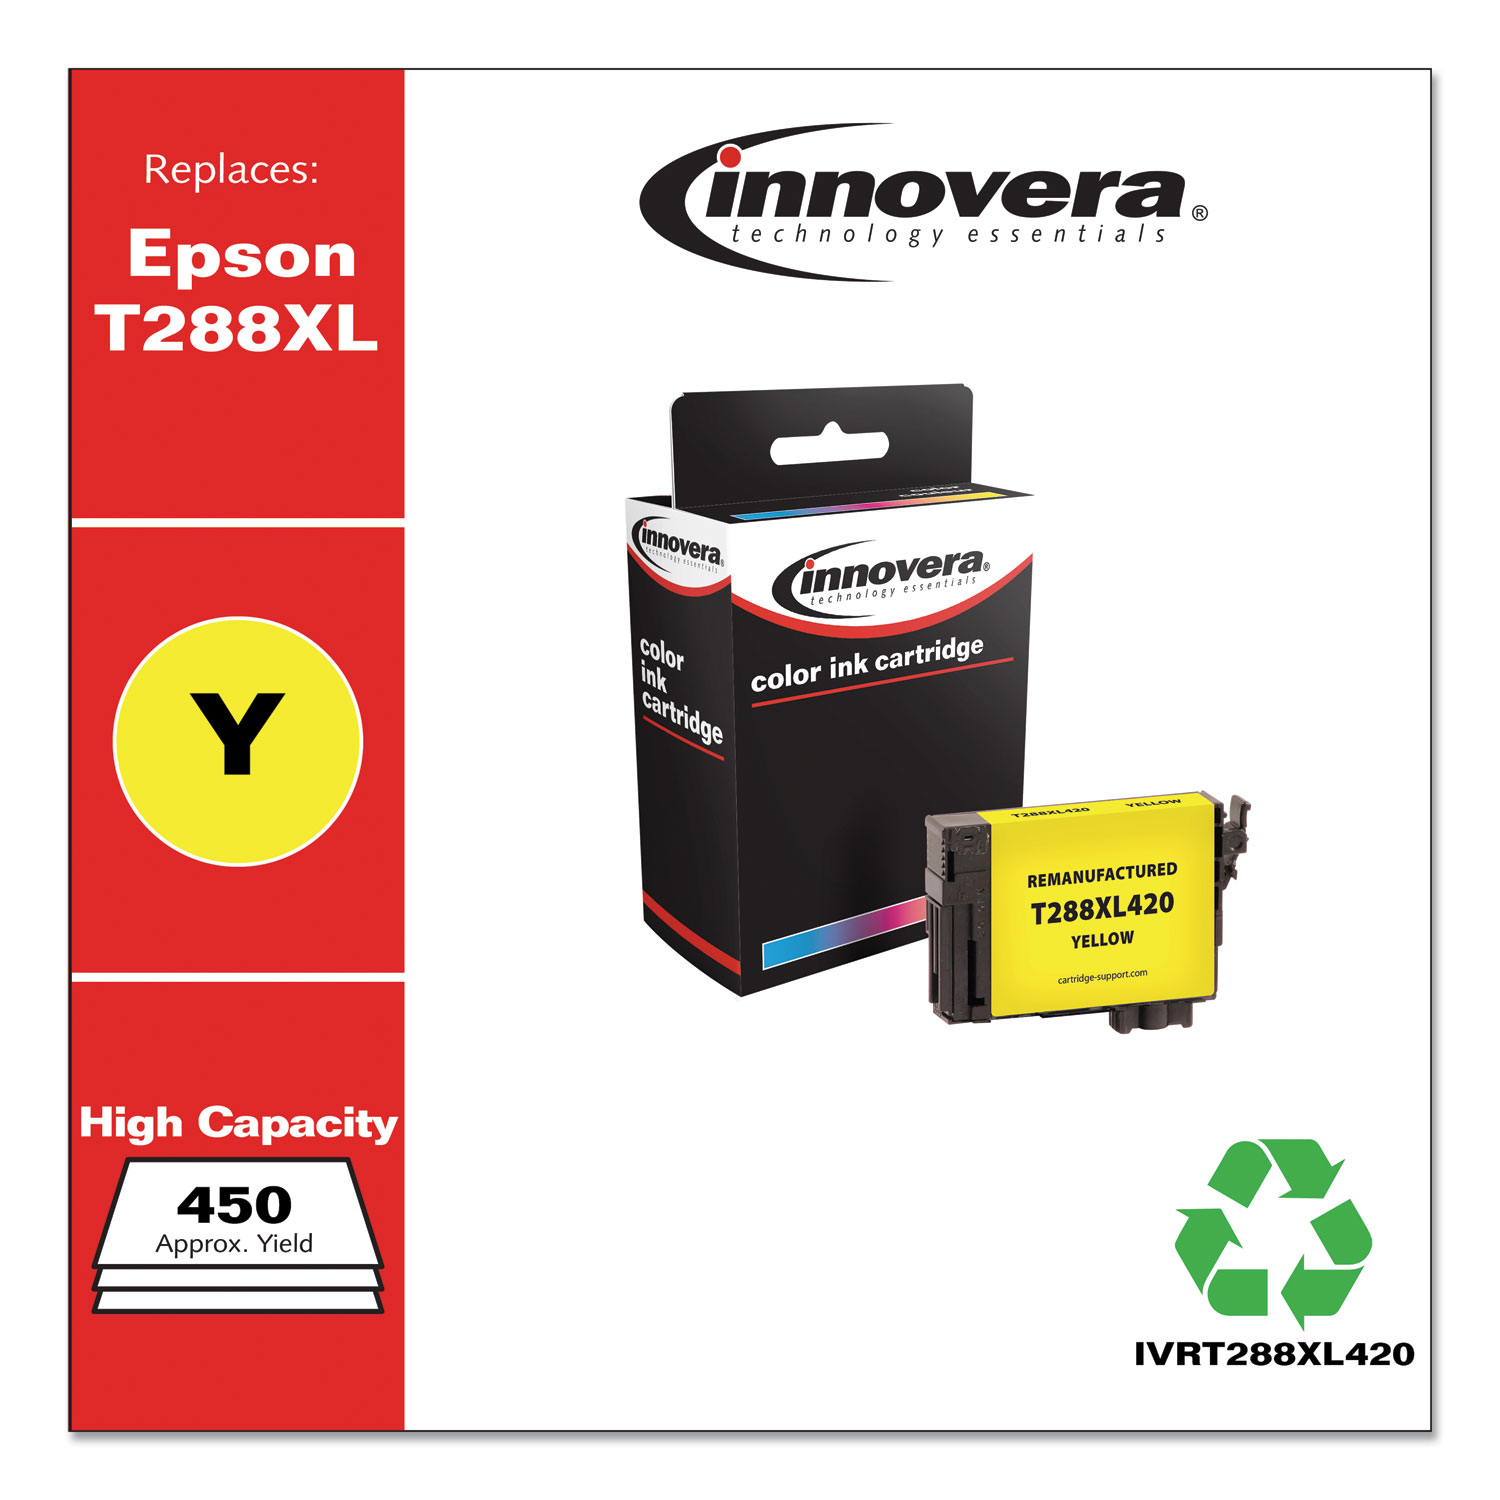  Innovera IVRT288XL420 Remanufactured Yellow High-Yield Ink, Replacement for Epson T288XL (T288XL420), 450 Page-Yield (IVRT288XL420) 